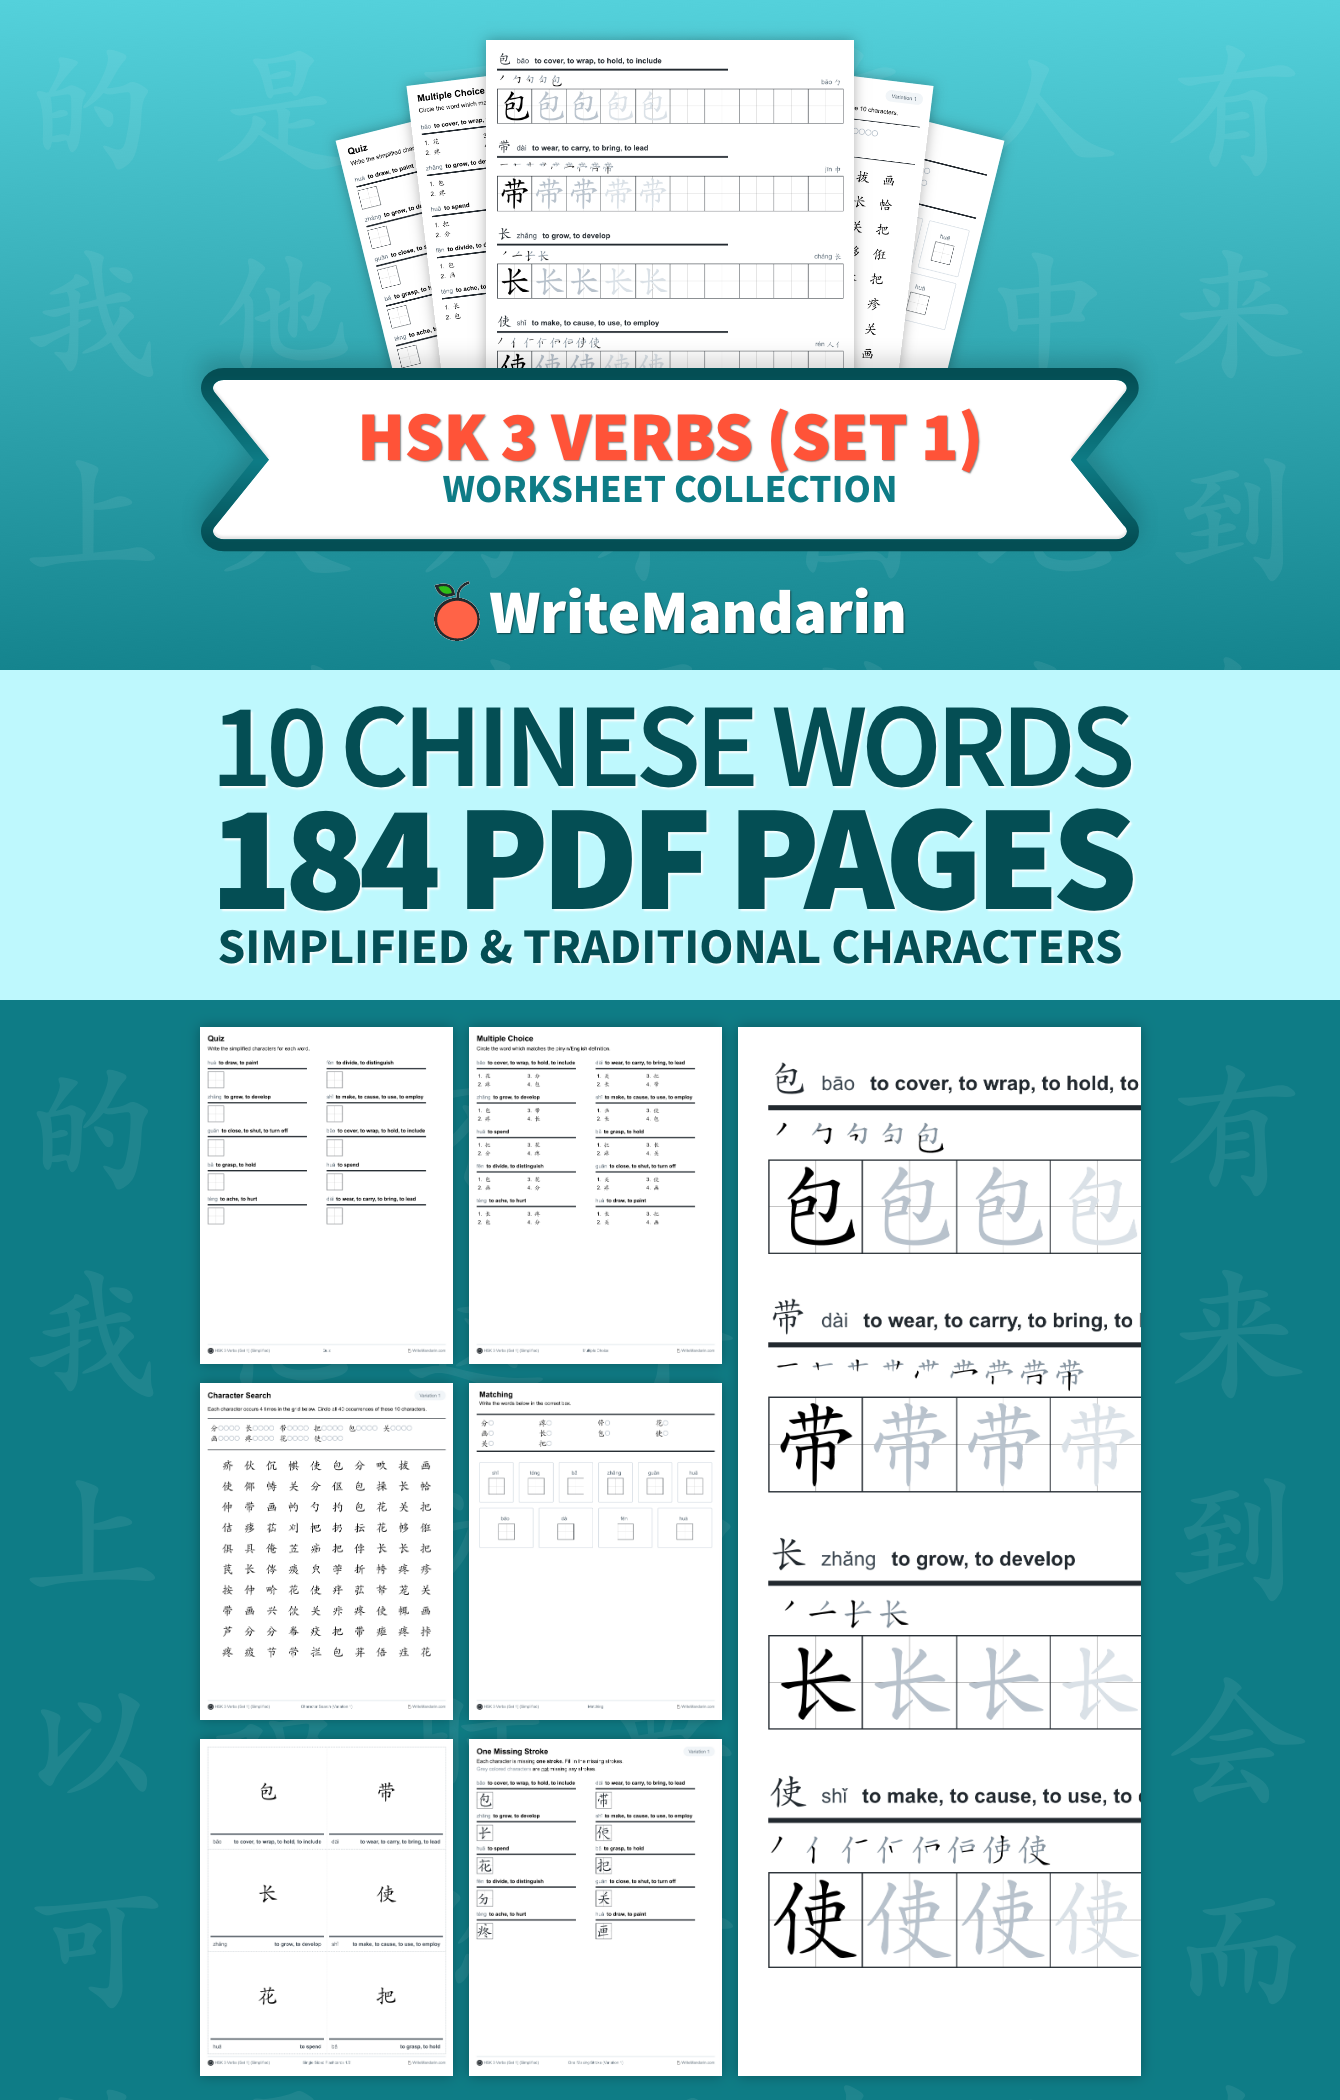 Preview image of HSK 3 Verbs (Set 1) worksheet collection